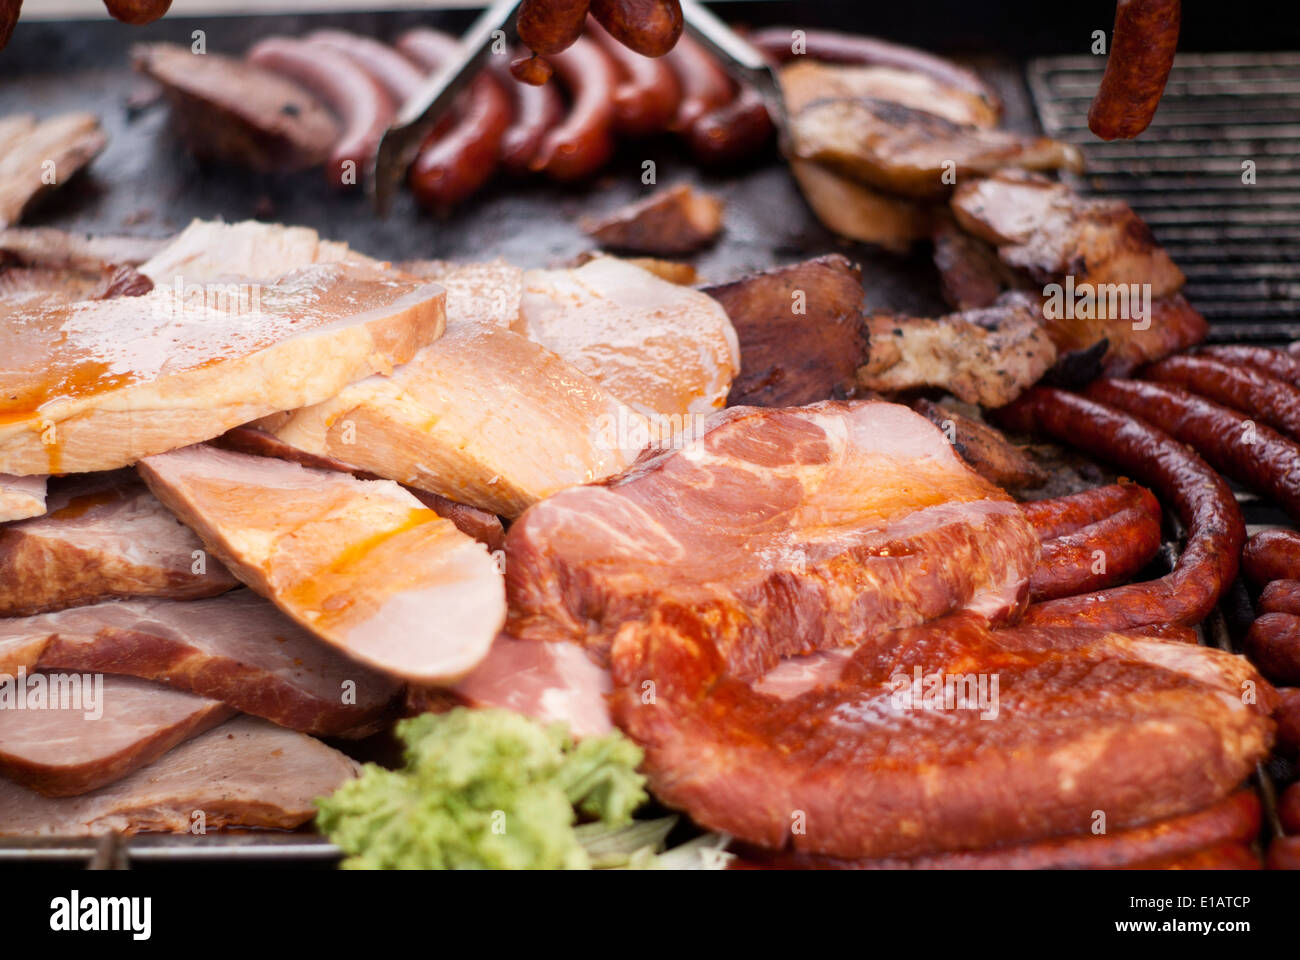 Meat like bacon, beef, speck, steak and wurst on a grill Stock Photo